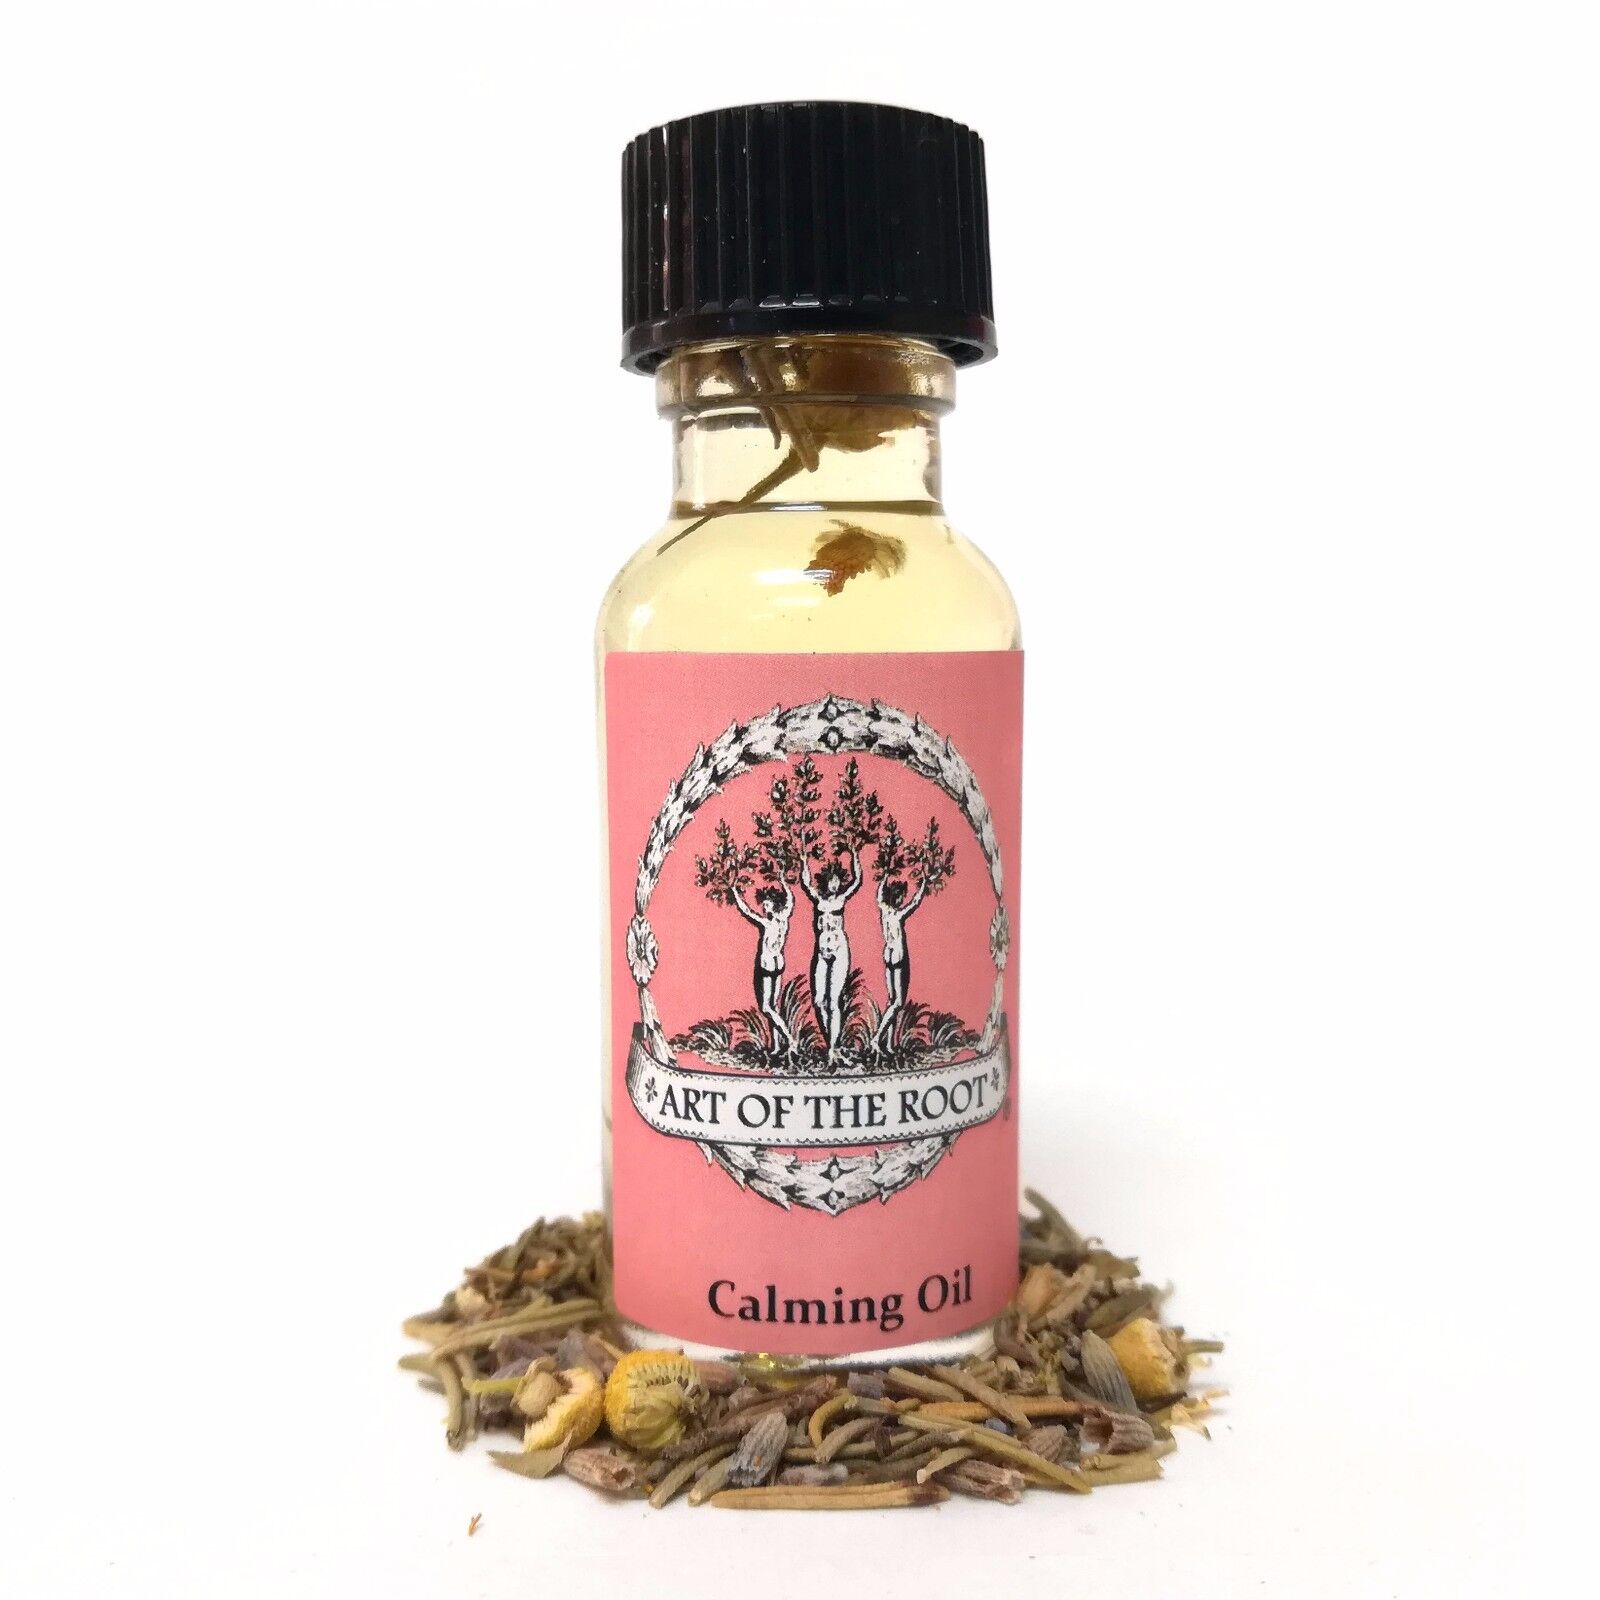  Calming Oil Anxiety Stress Nervousness Peace Hoodoo Pagan Wiccan Voodoo Conjure